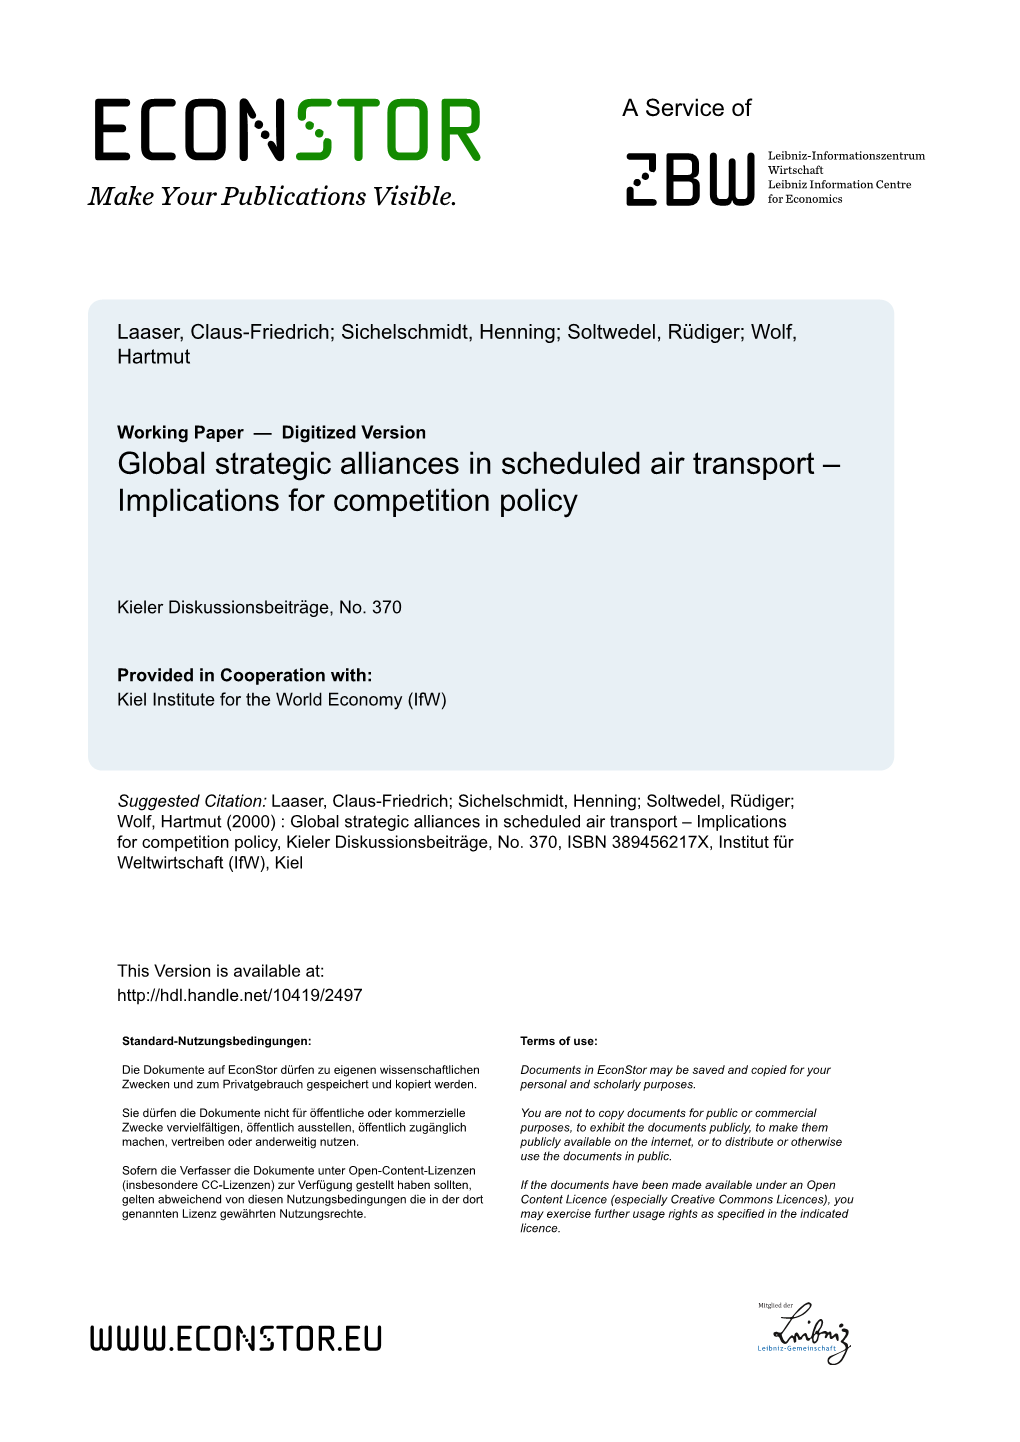 Global Strategic Alliances in Scheduled Air Transport – Implications for Competition Policy